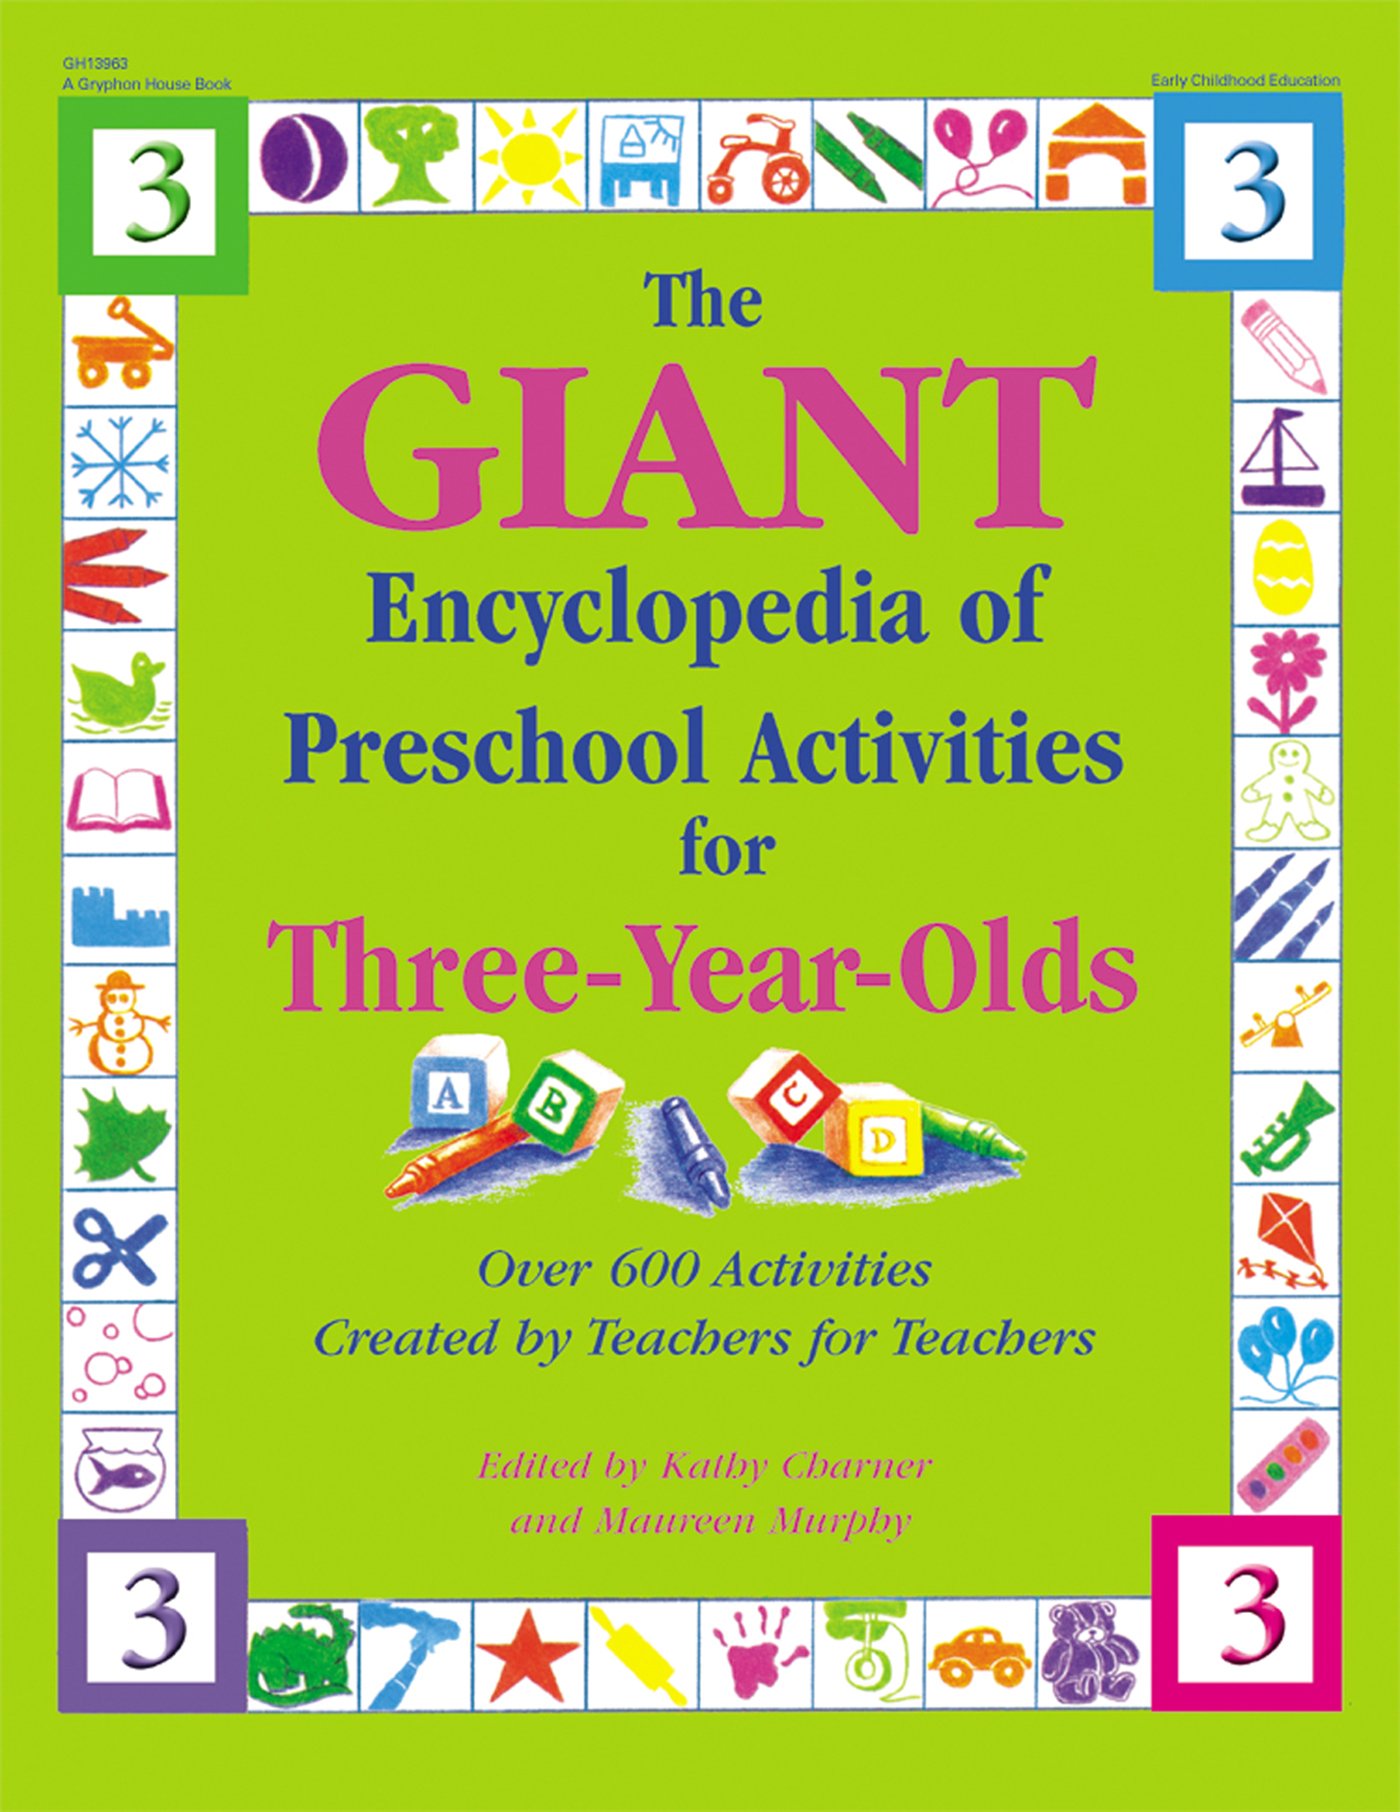 The GIANT Encyclopedia of Preschool Activities for 3-Year-Olds